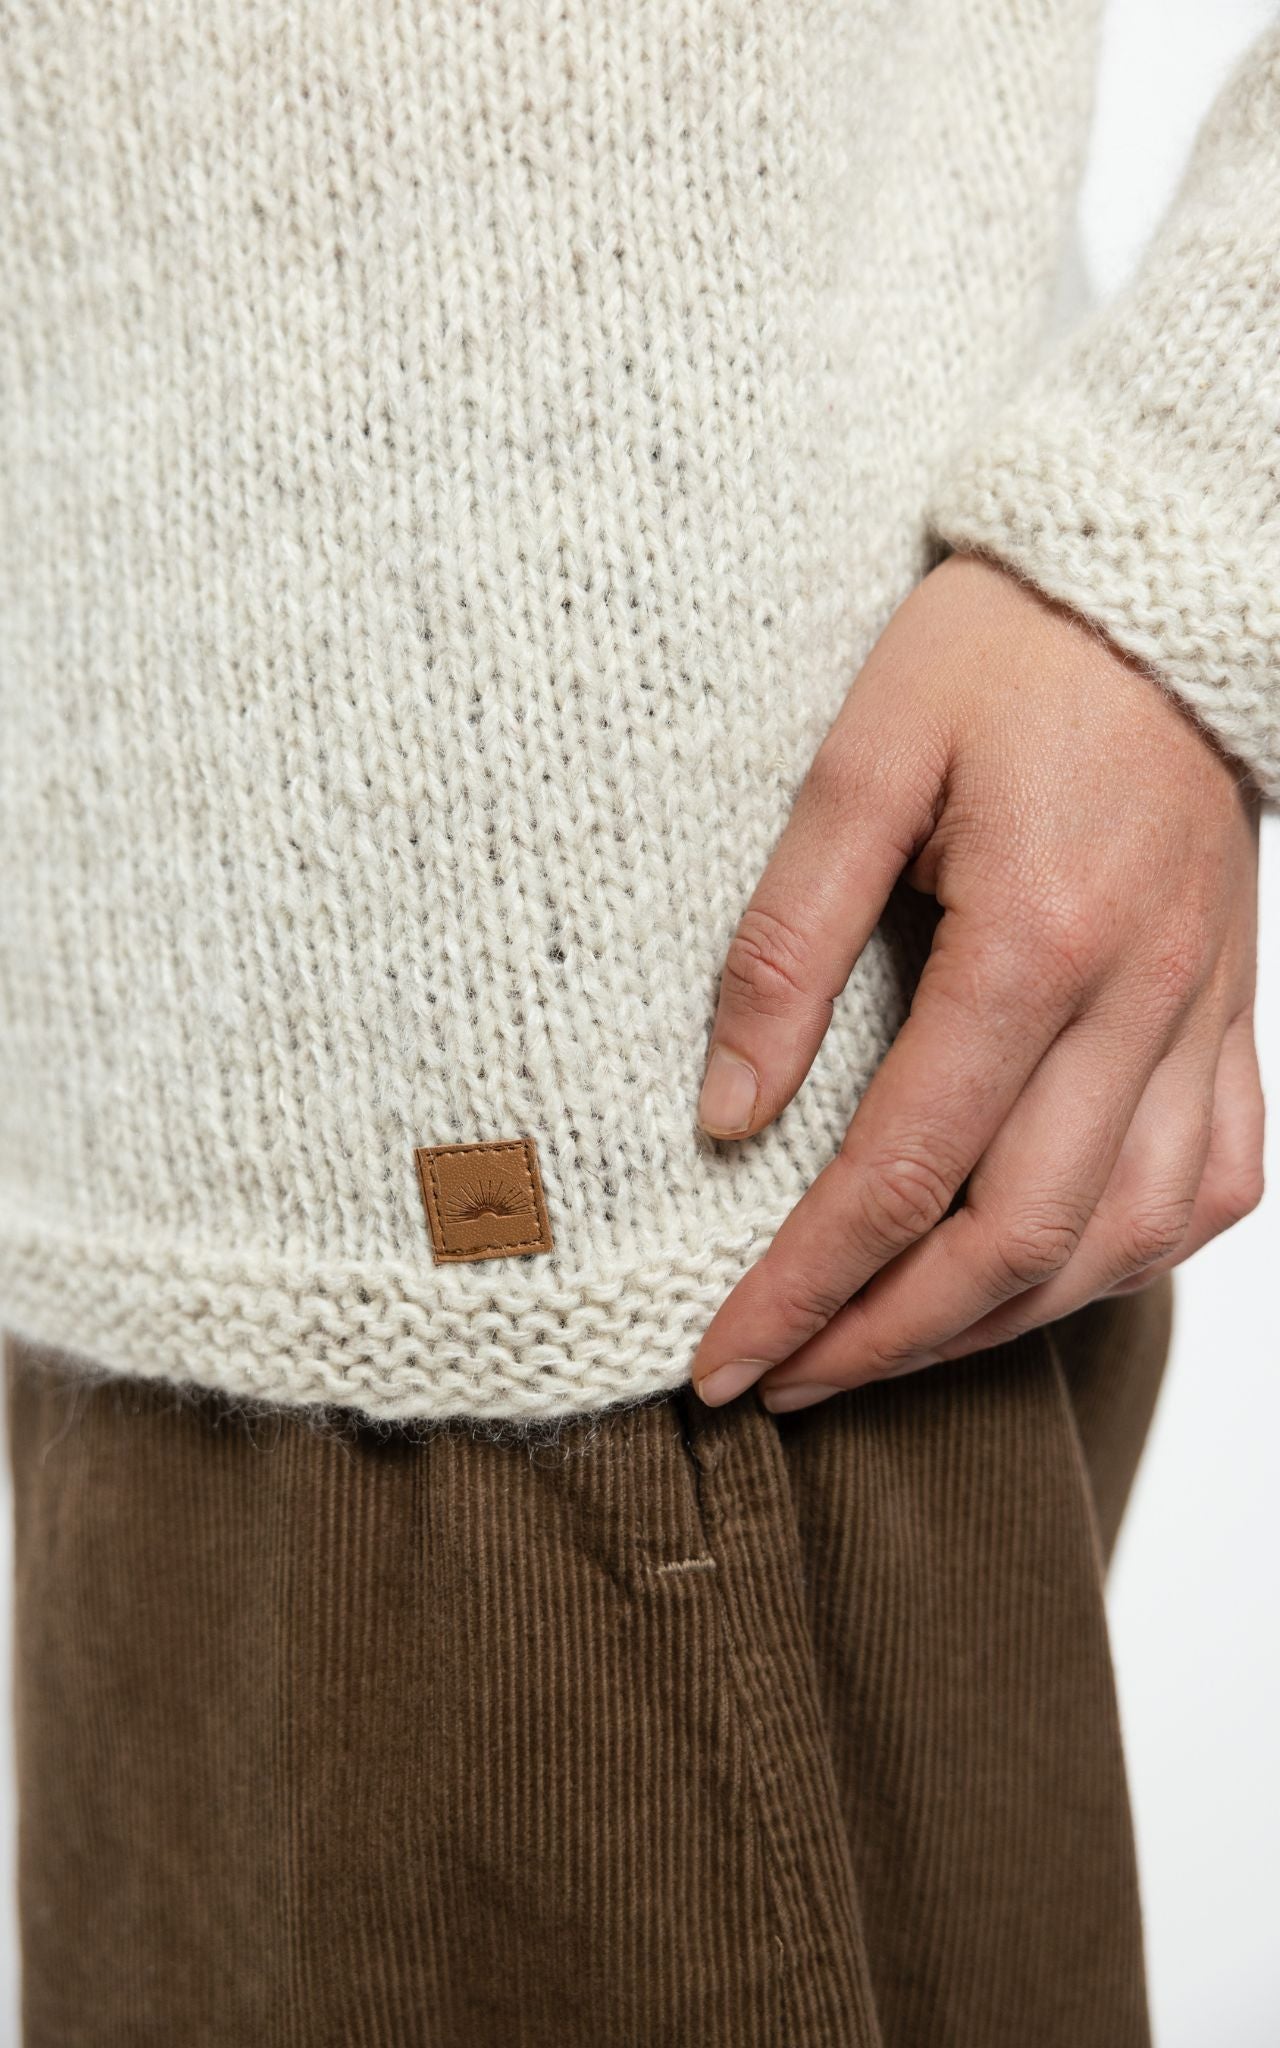 Surya Australia Ethical Wool Jumper made in Nepal - Natural